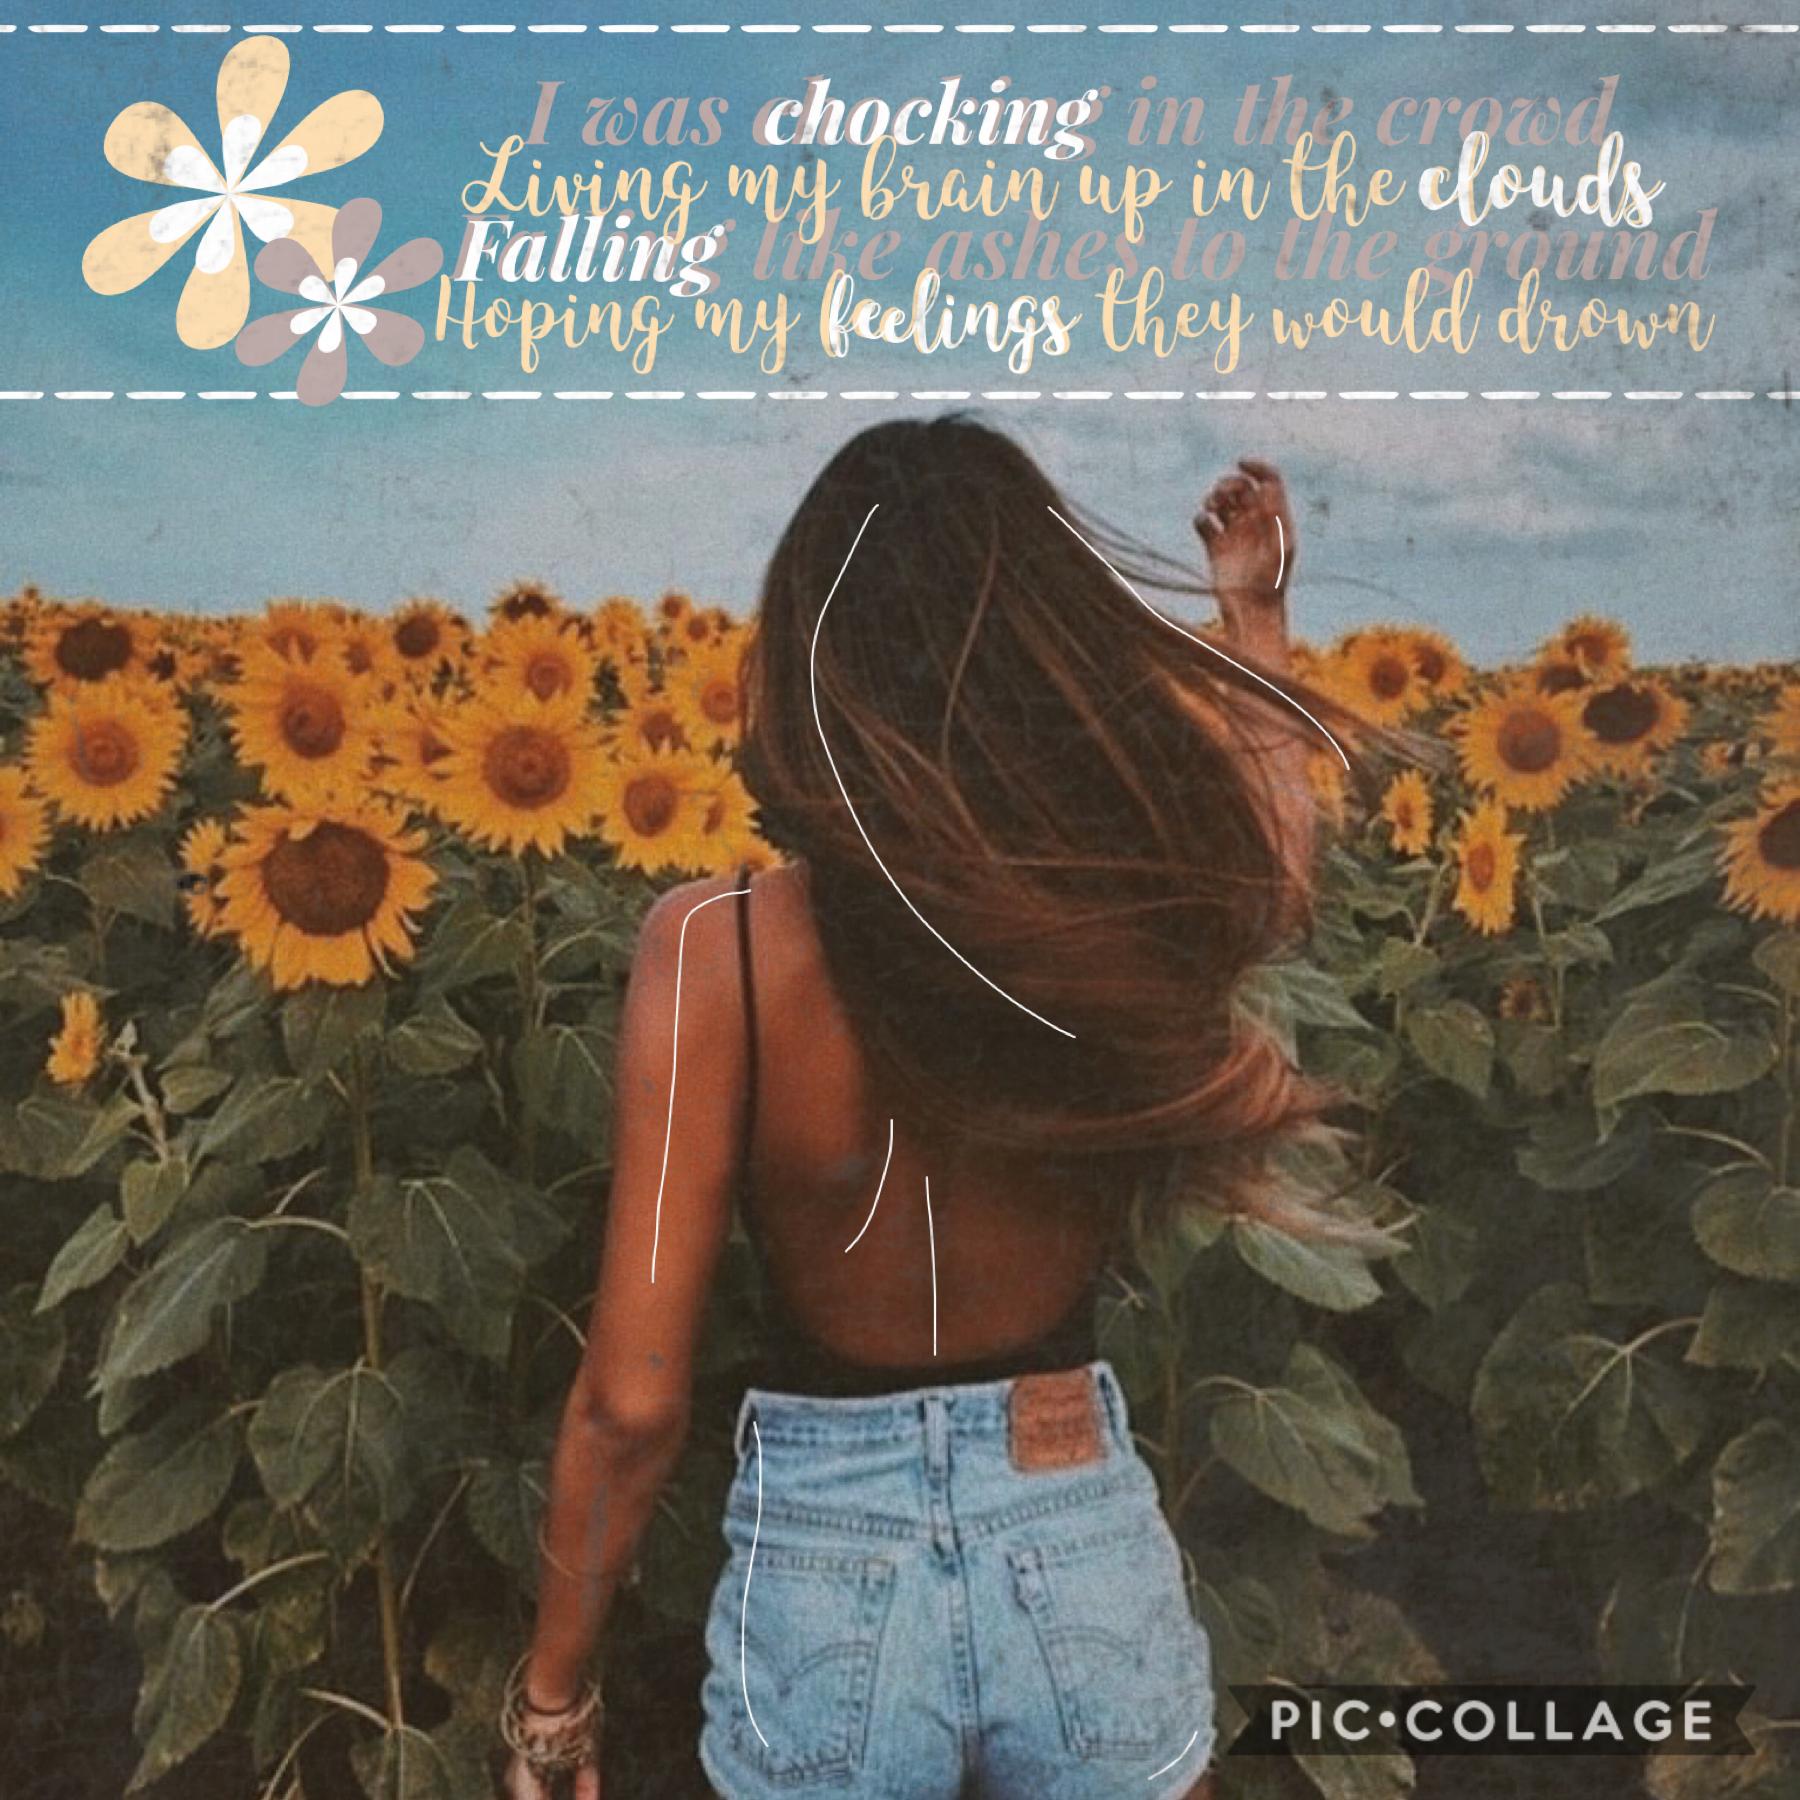 🌻TAPPITY TAP🌻
Song lyric guess round three, I think I might do book quotes soon! 💕🦋